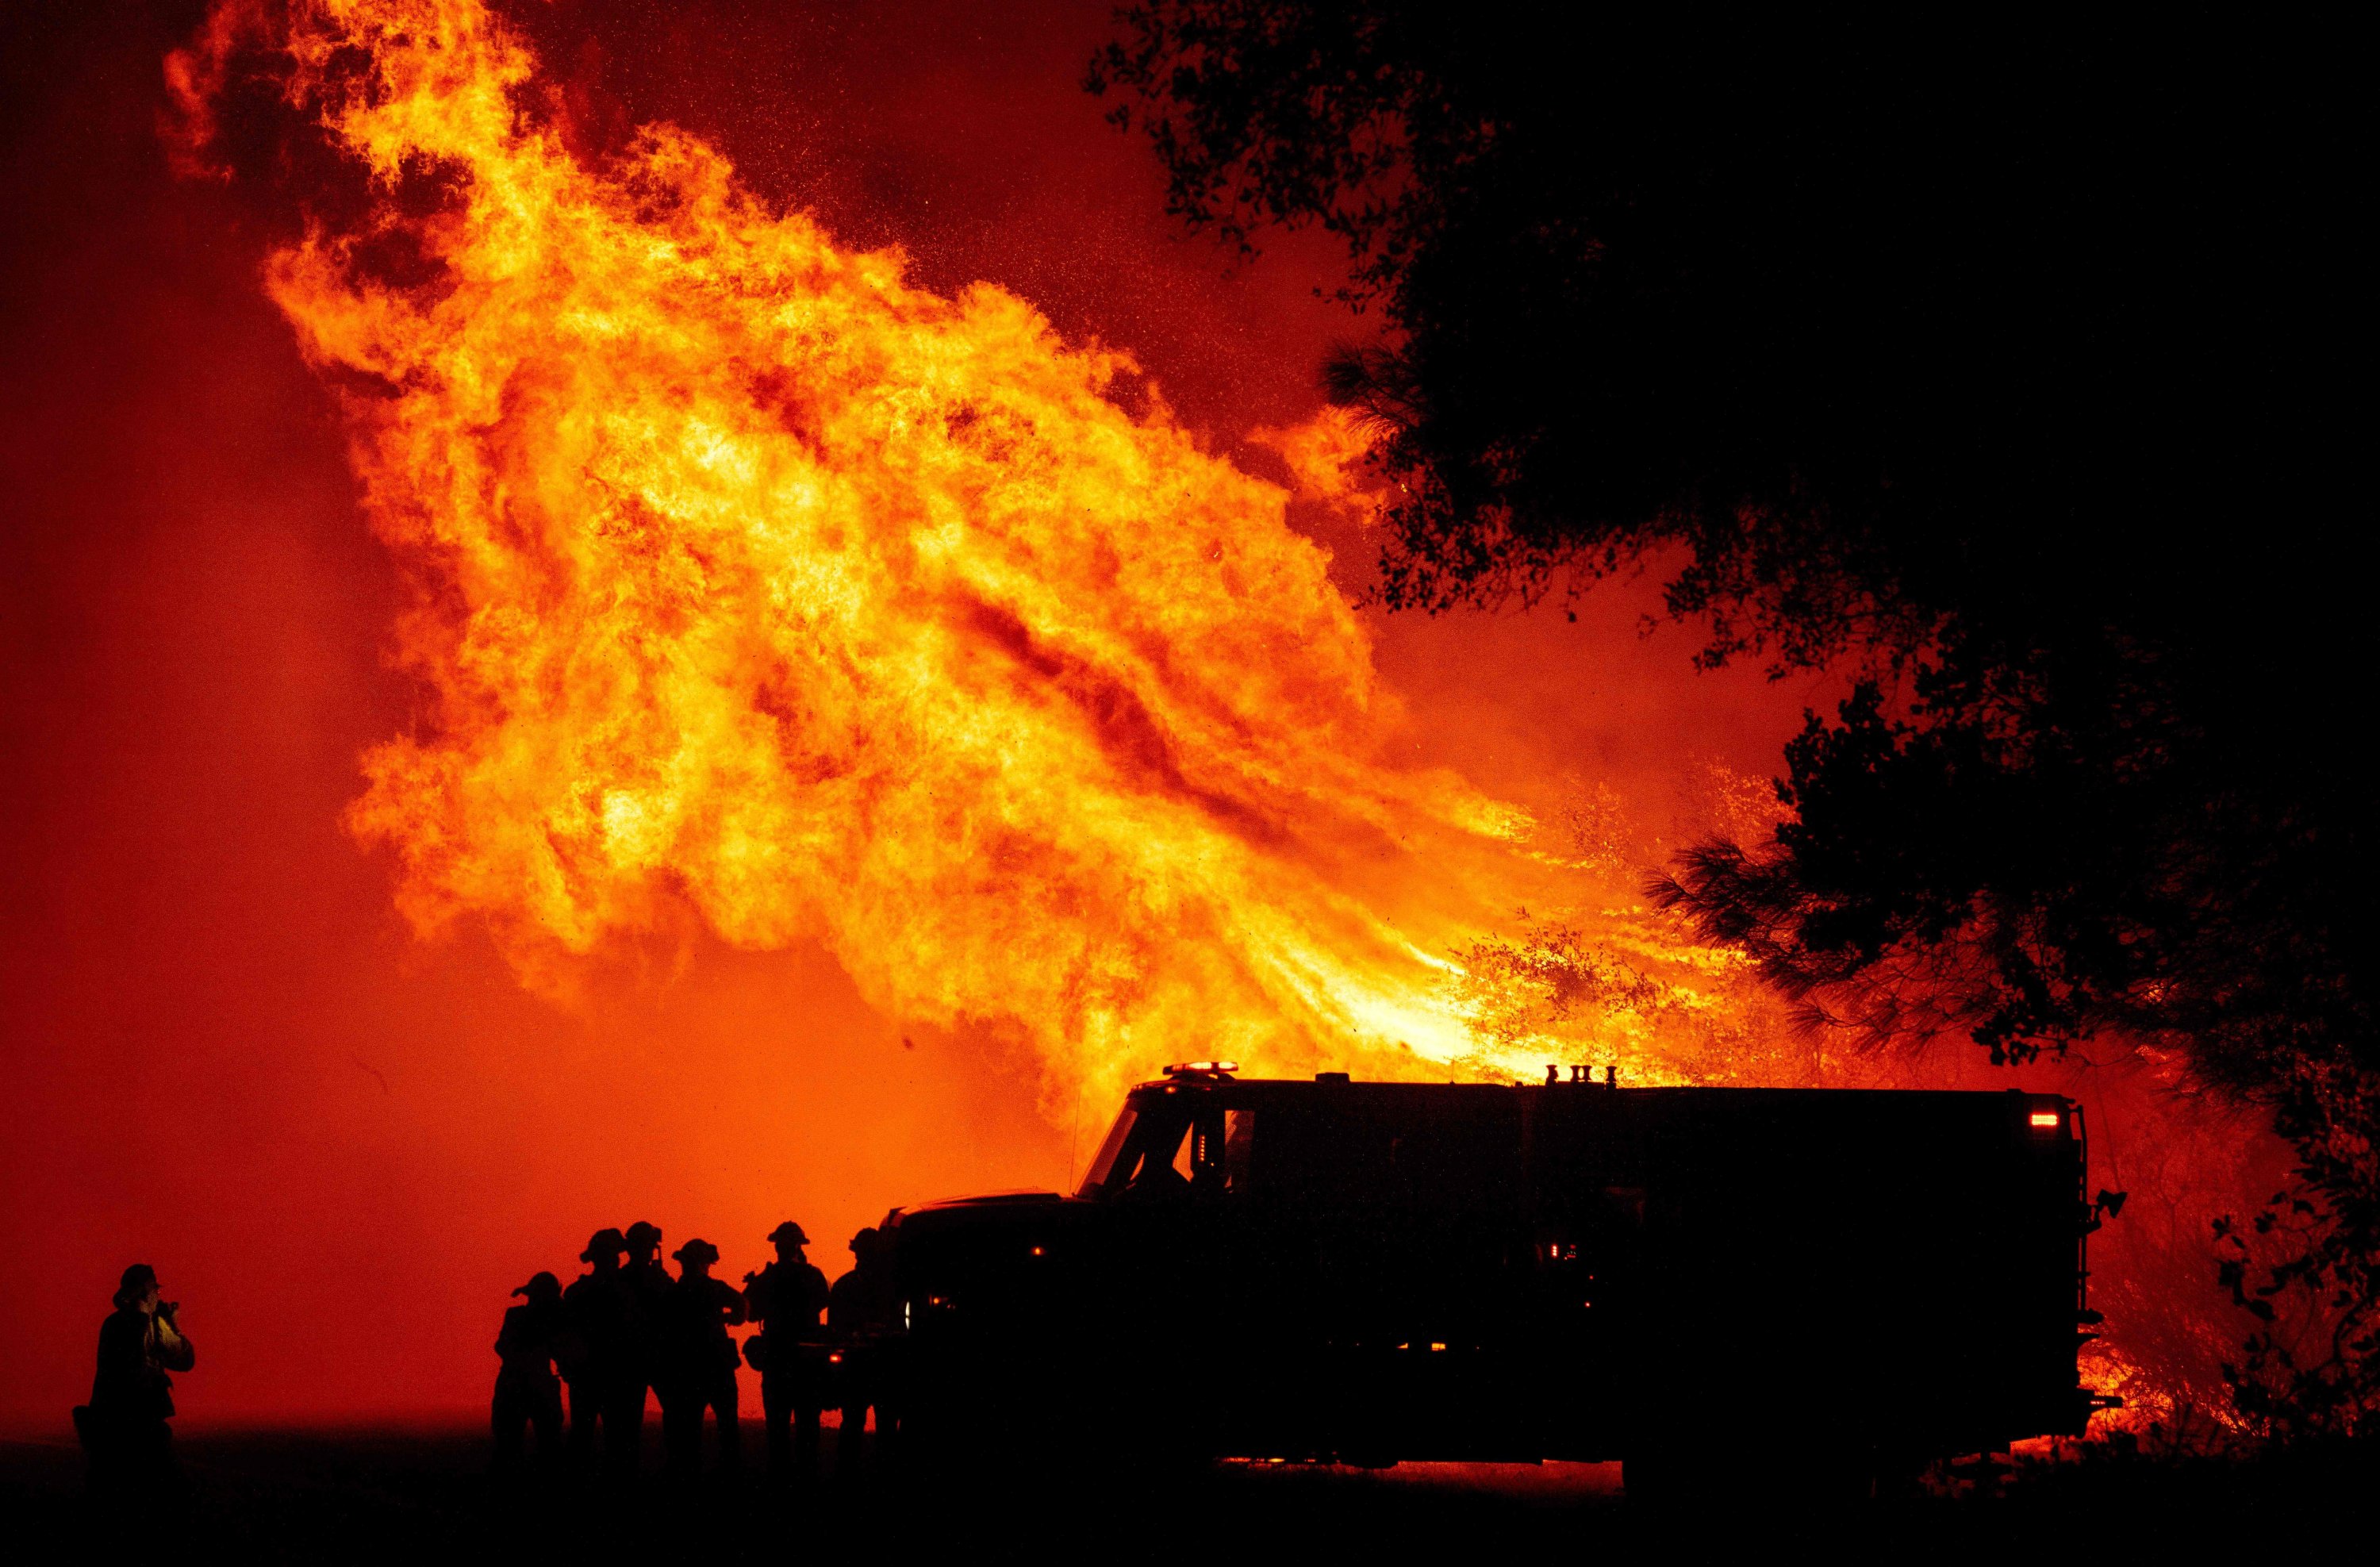 Butte county firefighters watch as flames tower over their truck during the Bear fire in Oroville, California, Sept. 9, 2020. (AFP Photo)